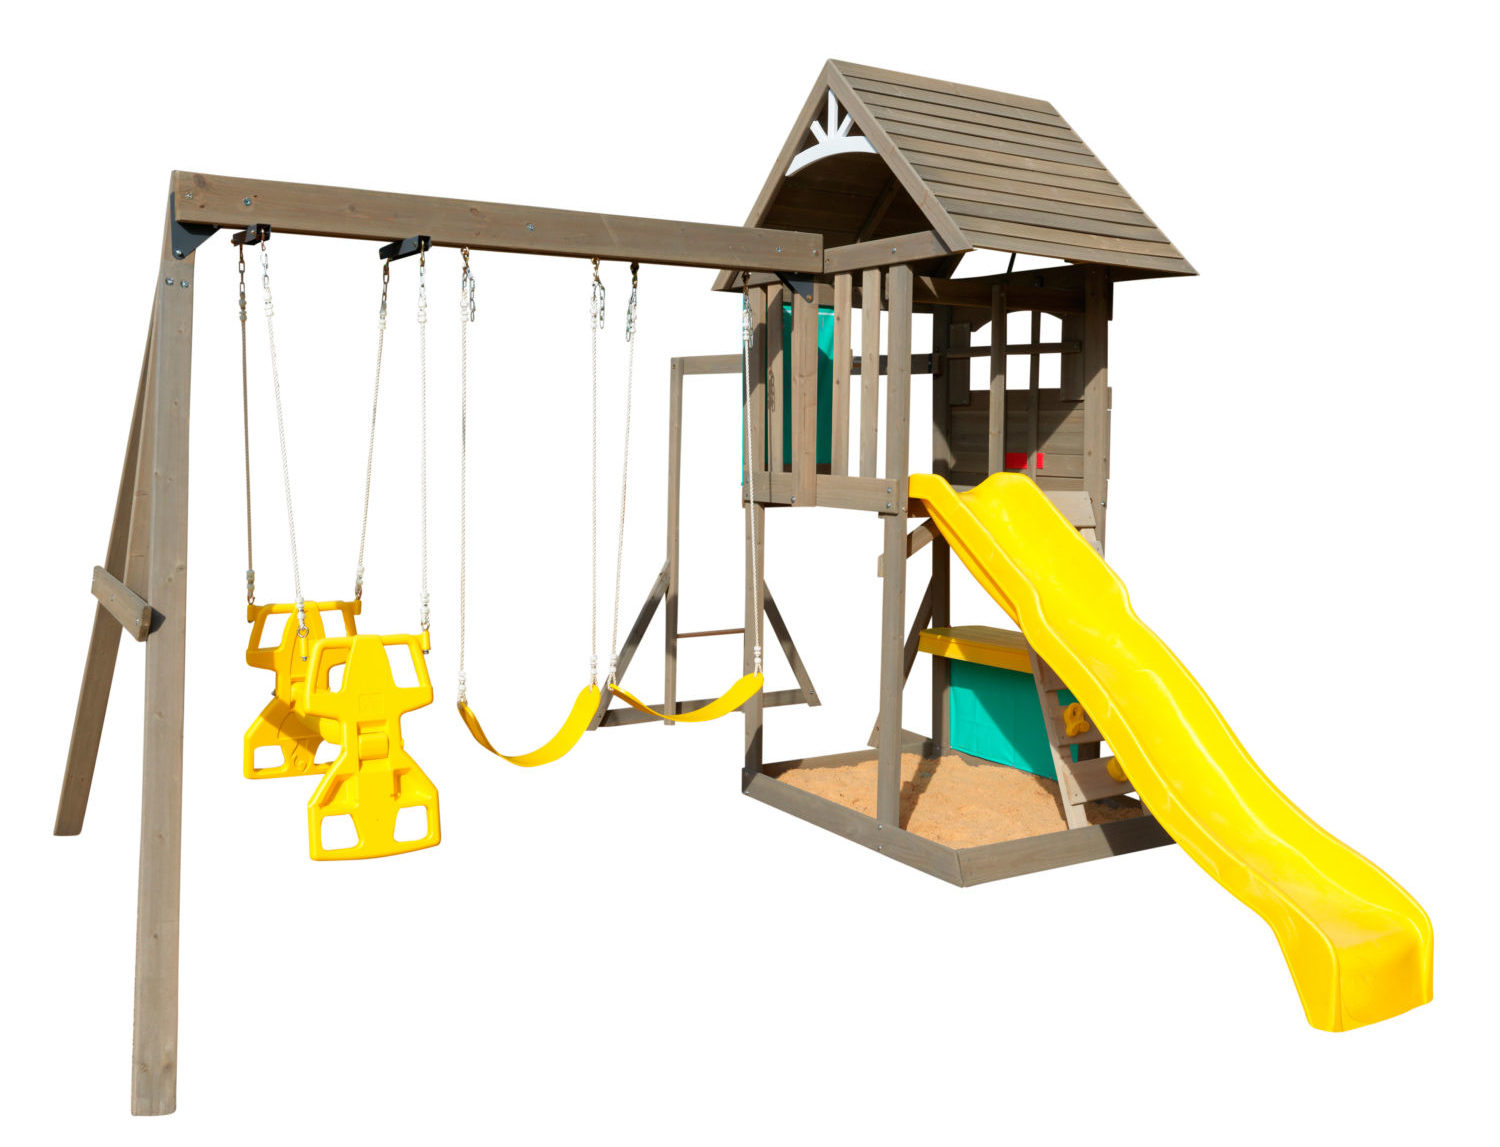 These Outdoor Playsets Give Kids The, Wooden Outdoor Playsets For Toddlers